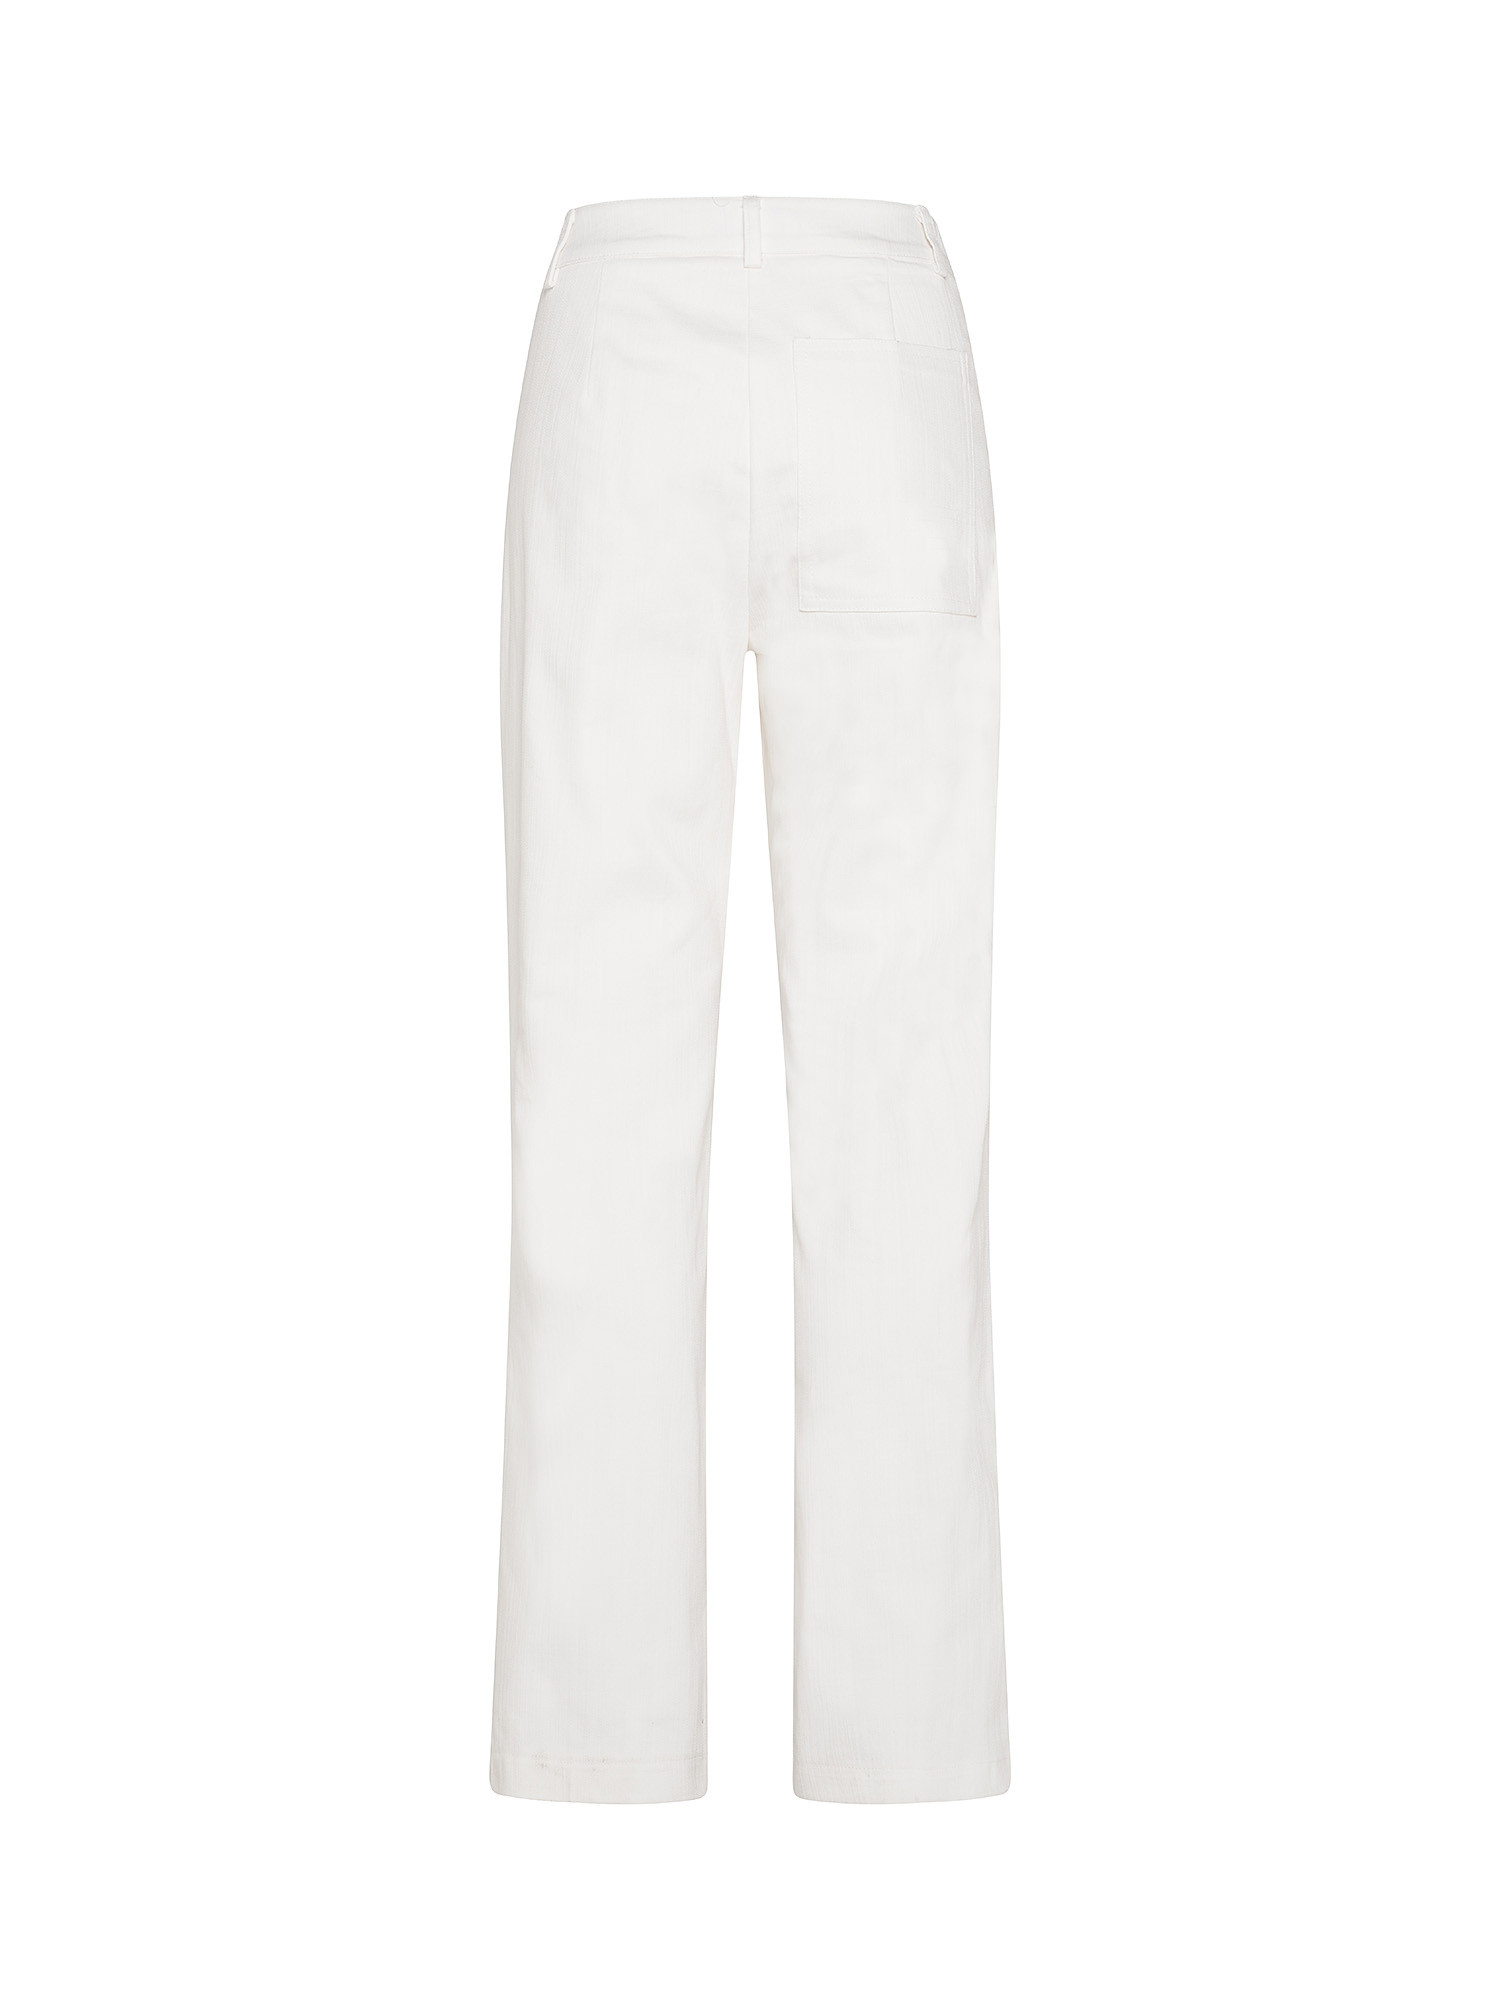 Trousers jeans, White, large image number 1